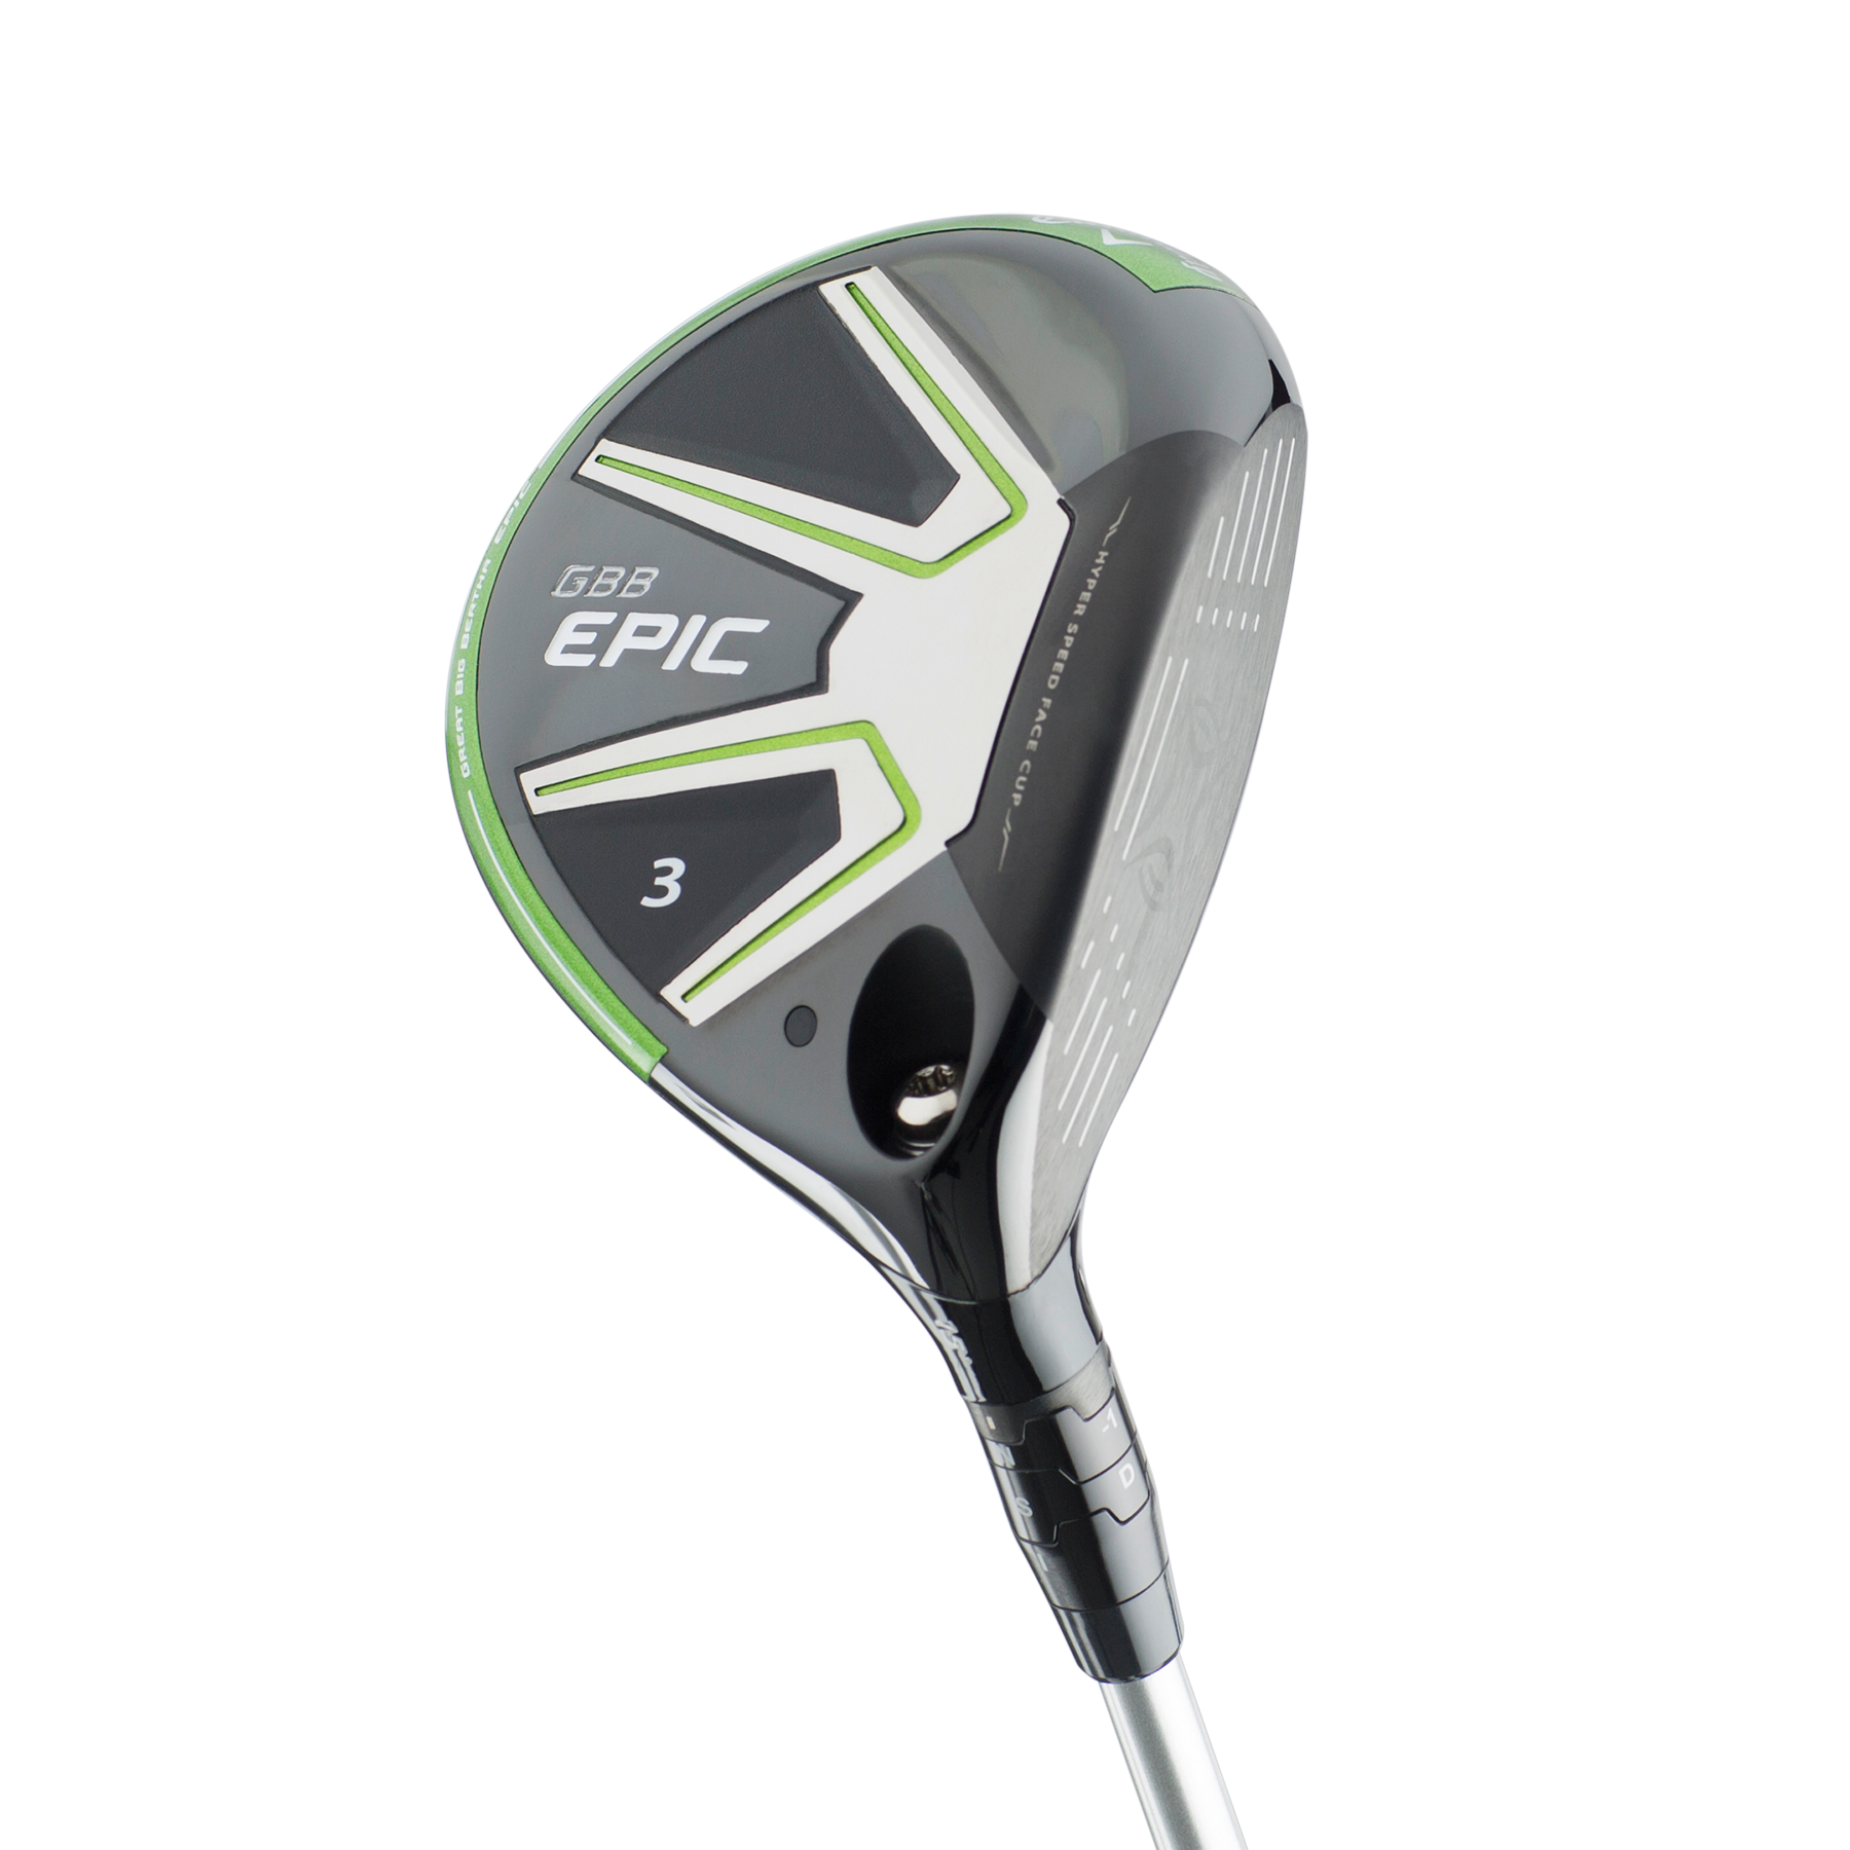 0318-FW-Beauty-Callaway-GBB-EPIC.png